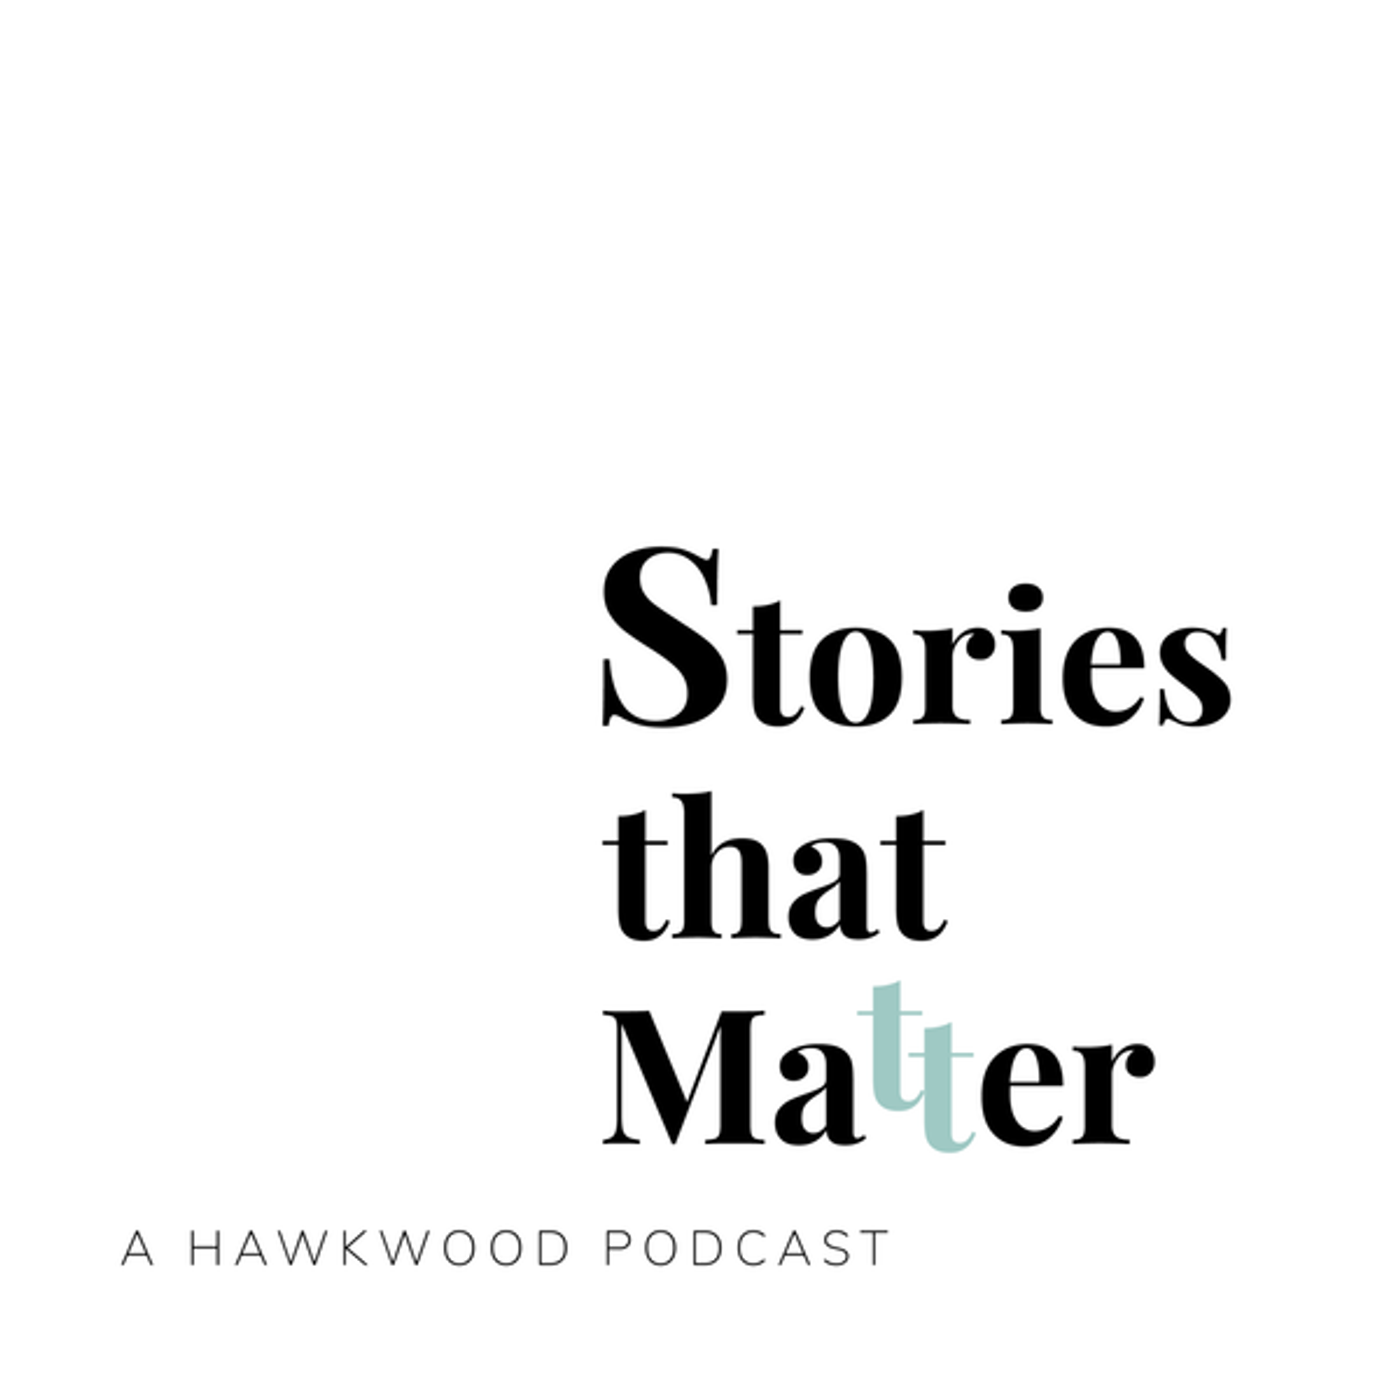 S2 Ep12: Stories that Matter with Soumik Datta and Jaz O'Hara